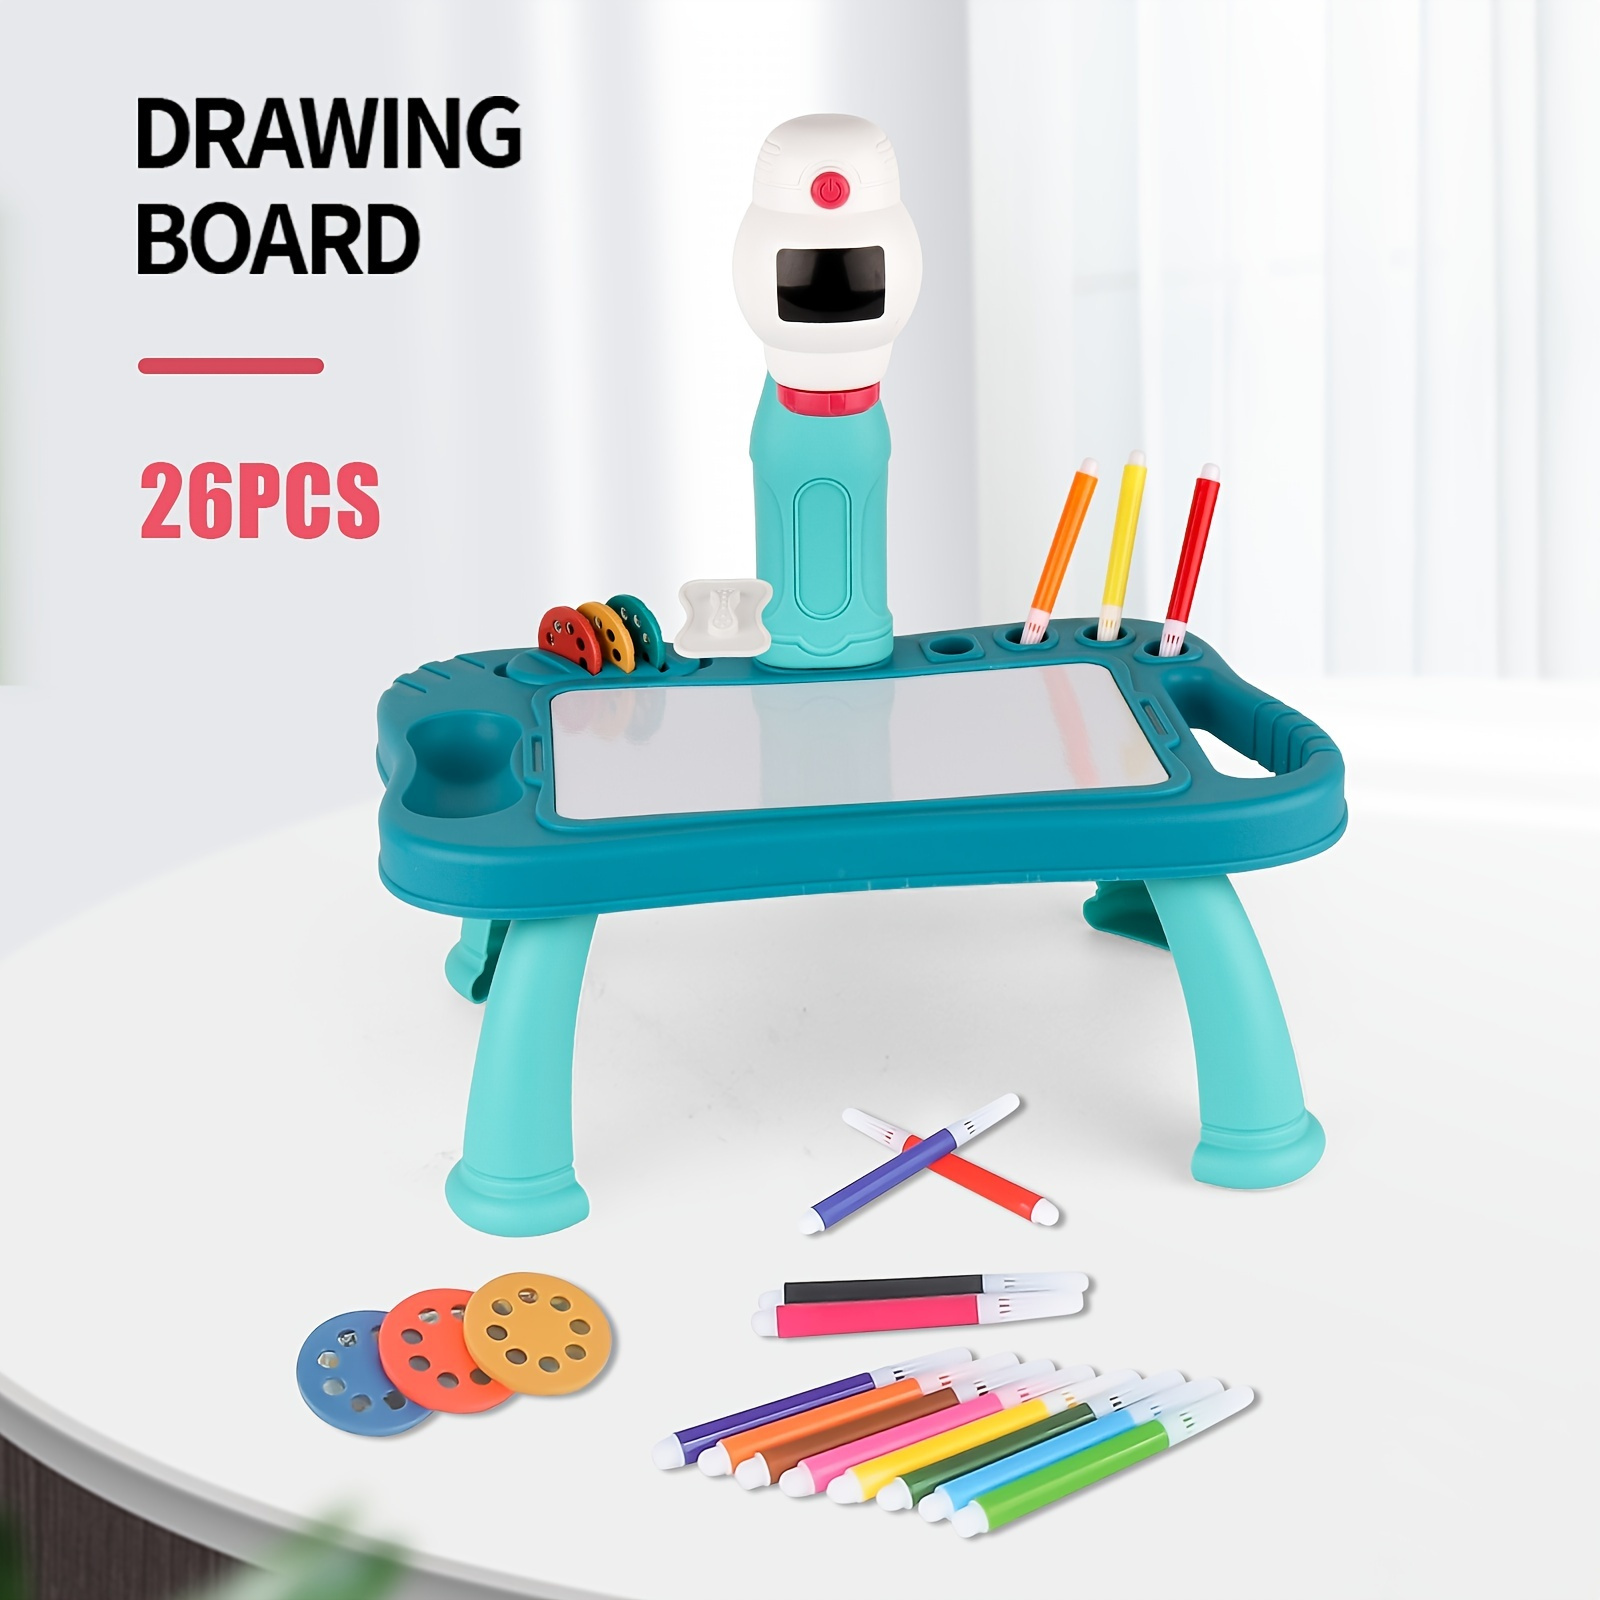 Fun And Educational Kids Led Projection Drawing Board - Enhance